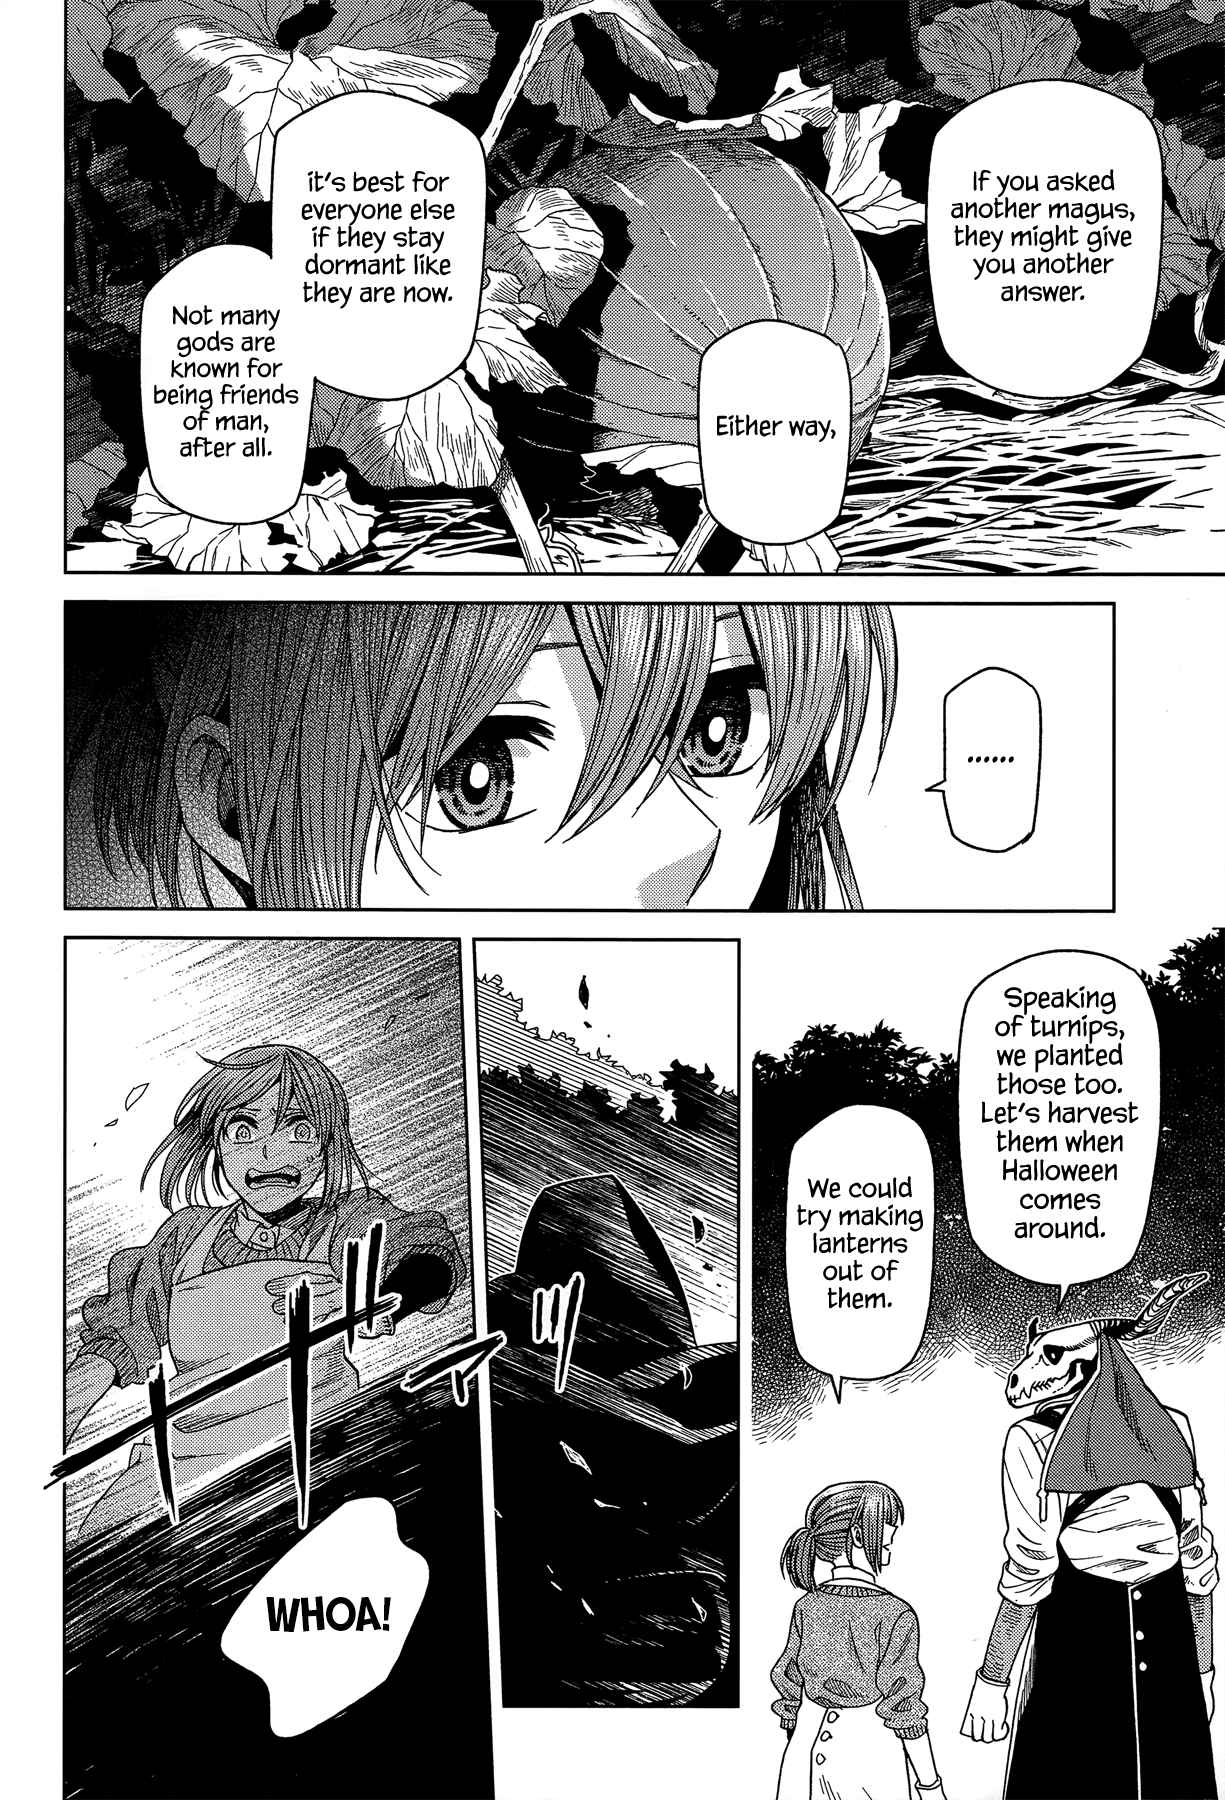 The Ancient Magus' Bride Vol. 10 Ch. 50 The cowl does not make the monk. I